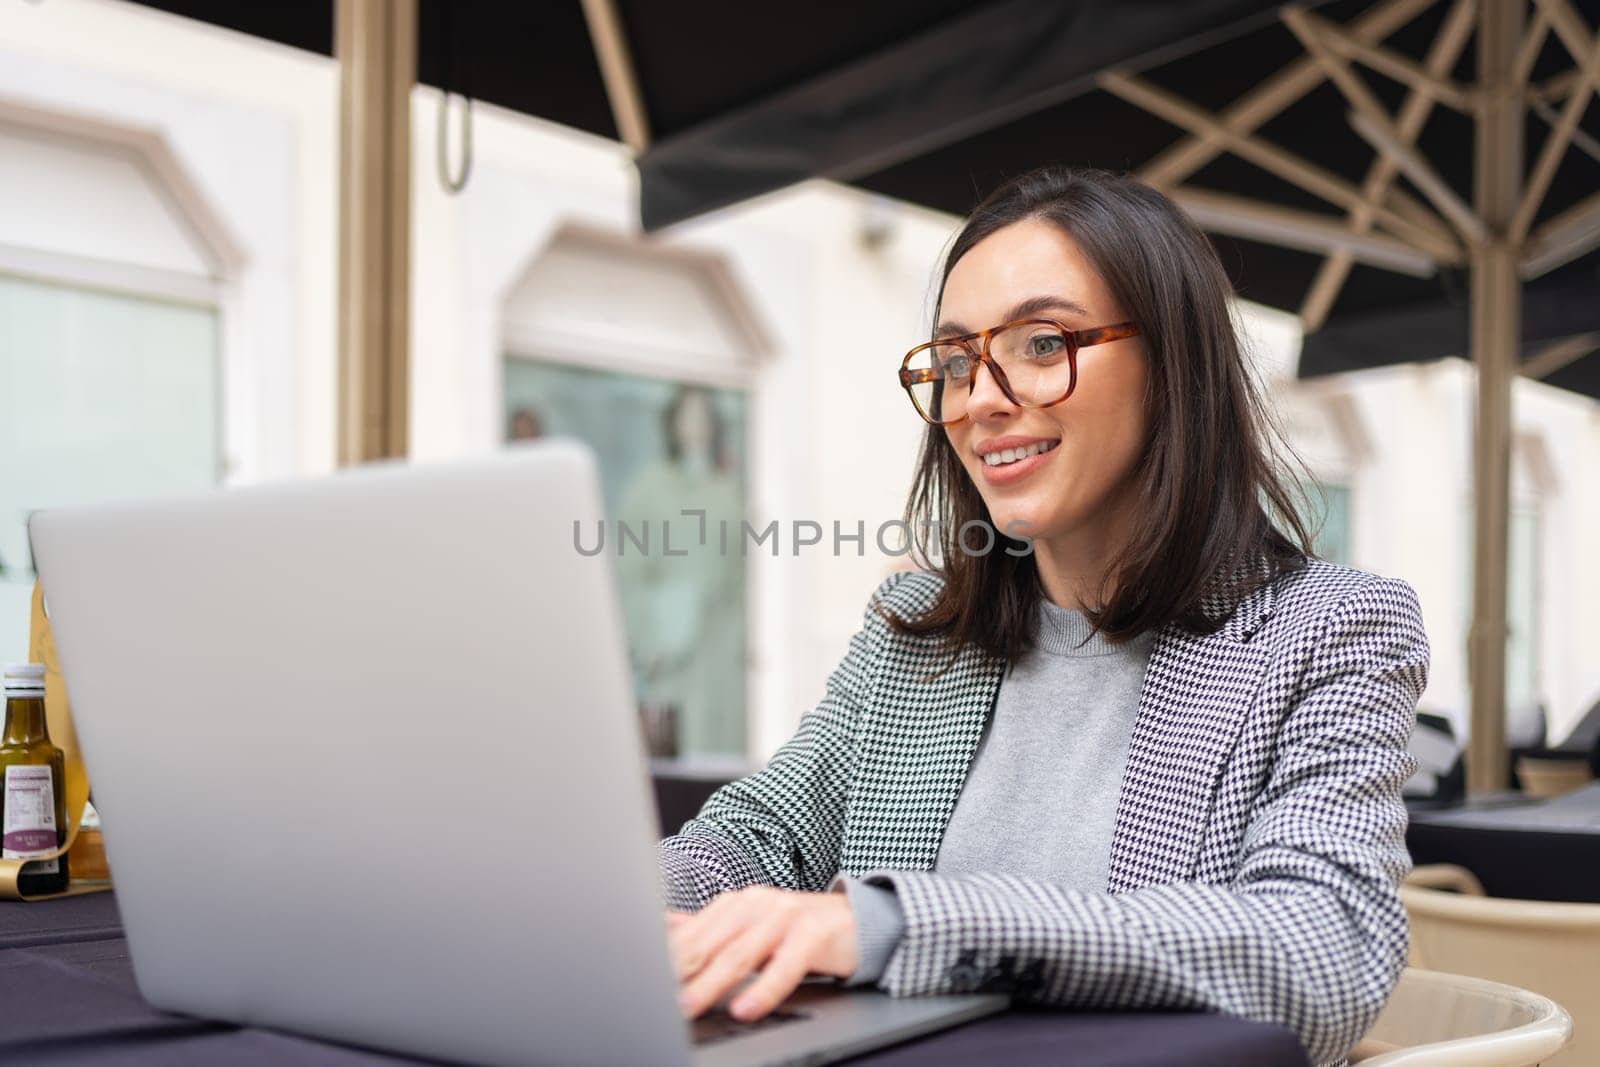 Woman working on remote from outdoor cafe, sitting with laptop on restaurant terrace on city street, studying. Female freelancer using laptop, smiling looking laptop screen